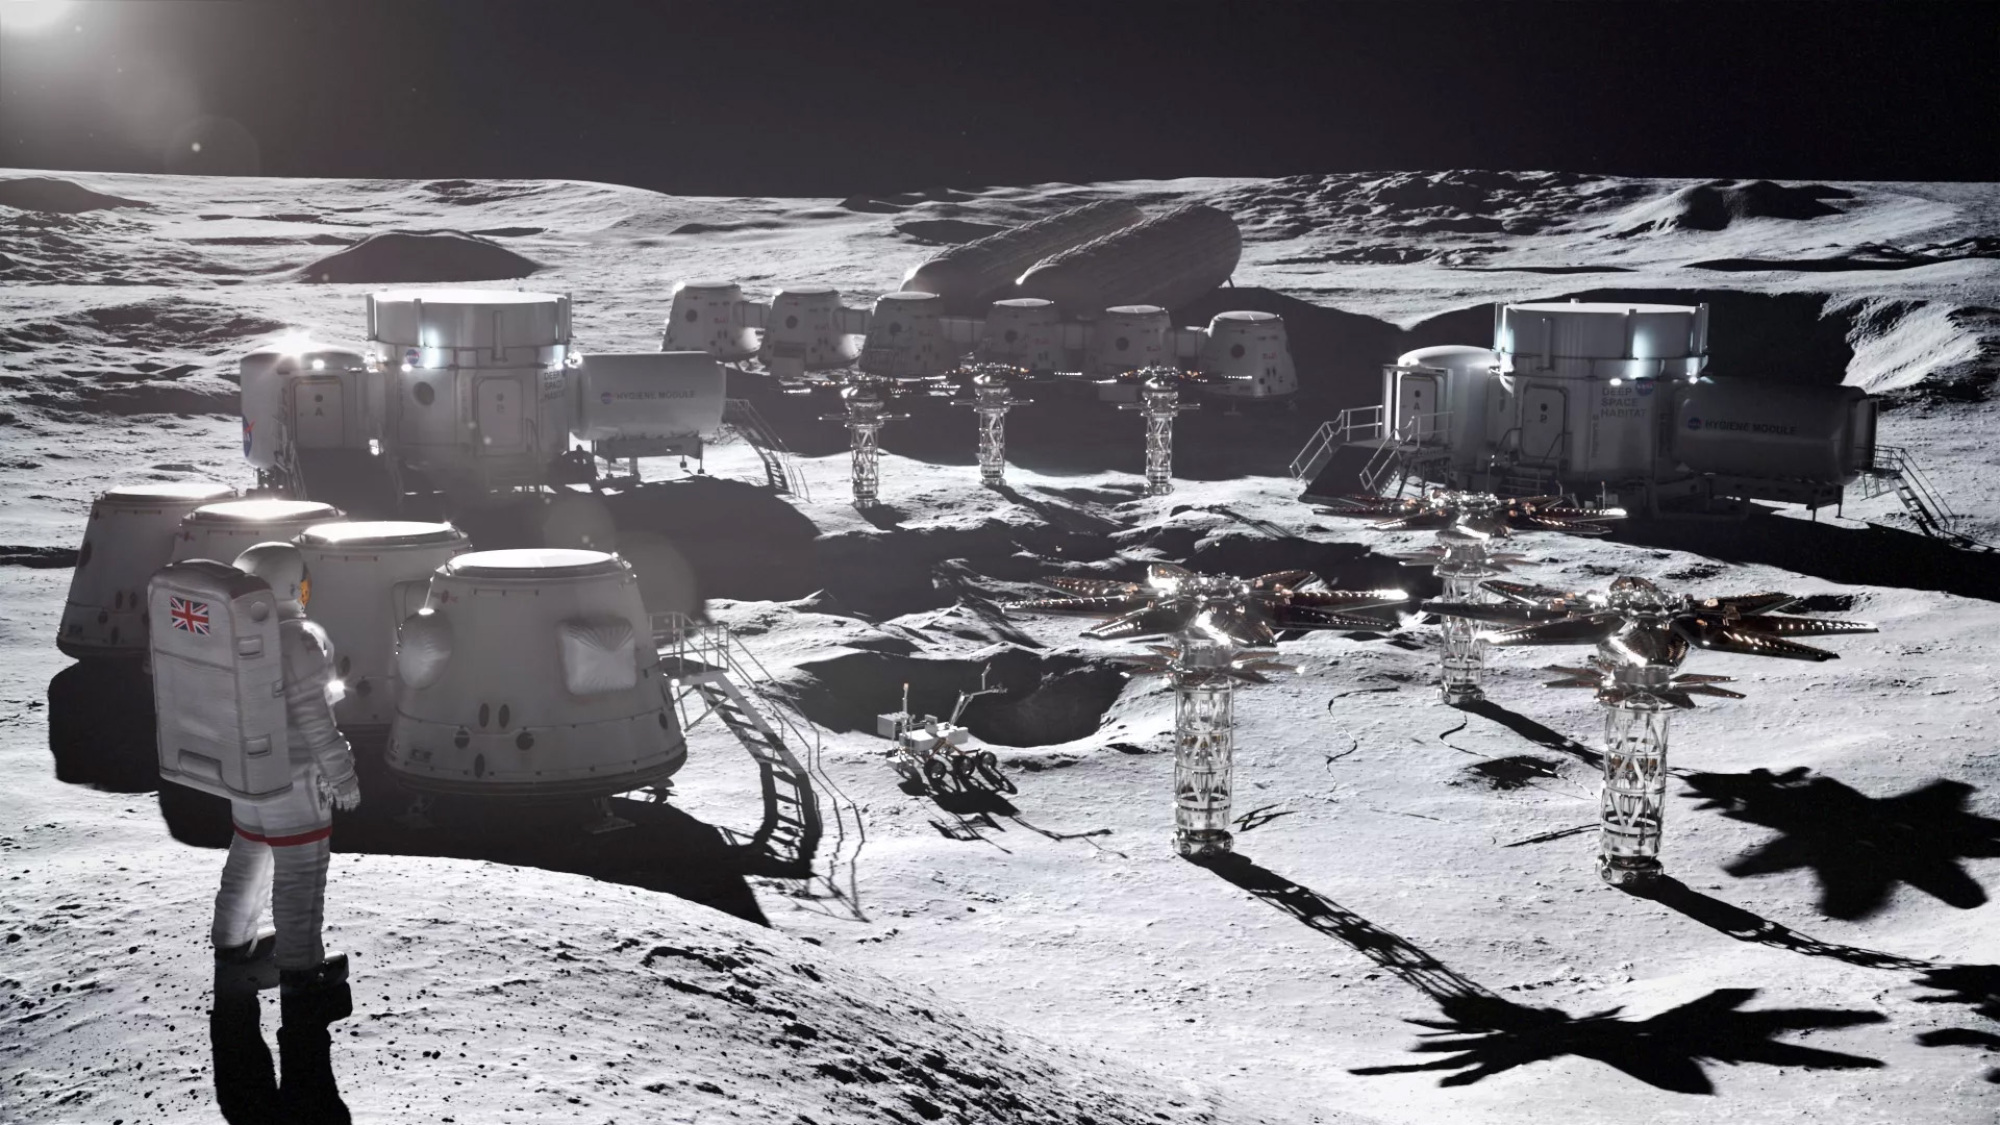 Artist's rendering of a lunar base with nuclear reactors.